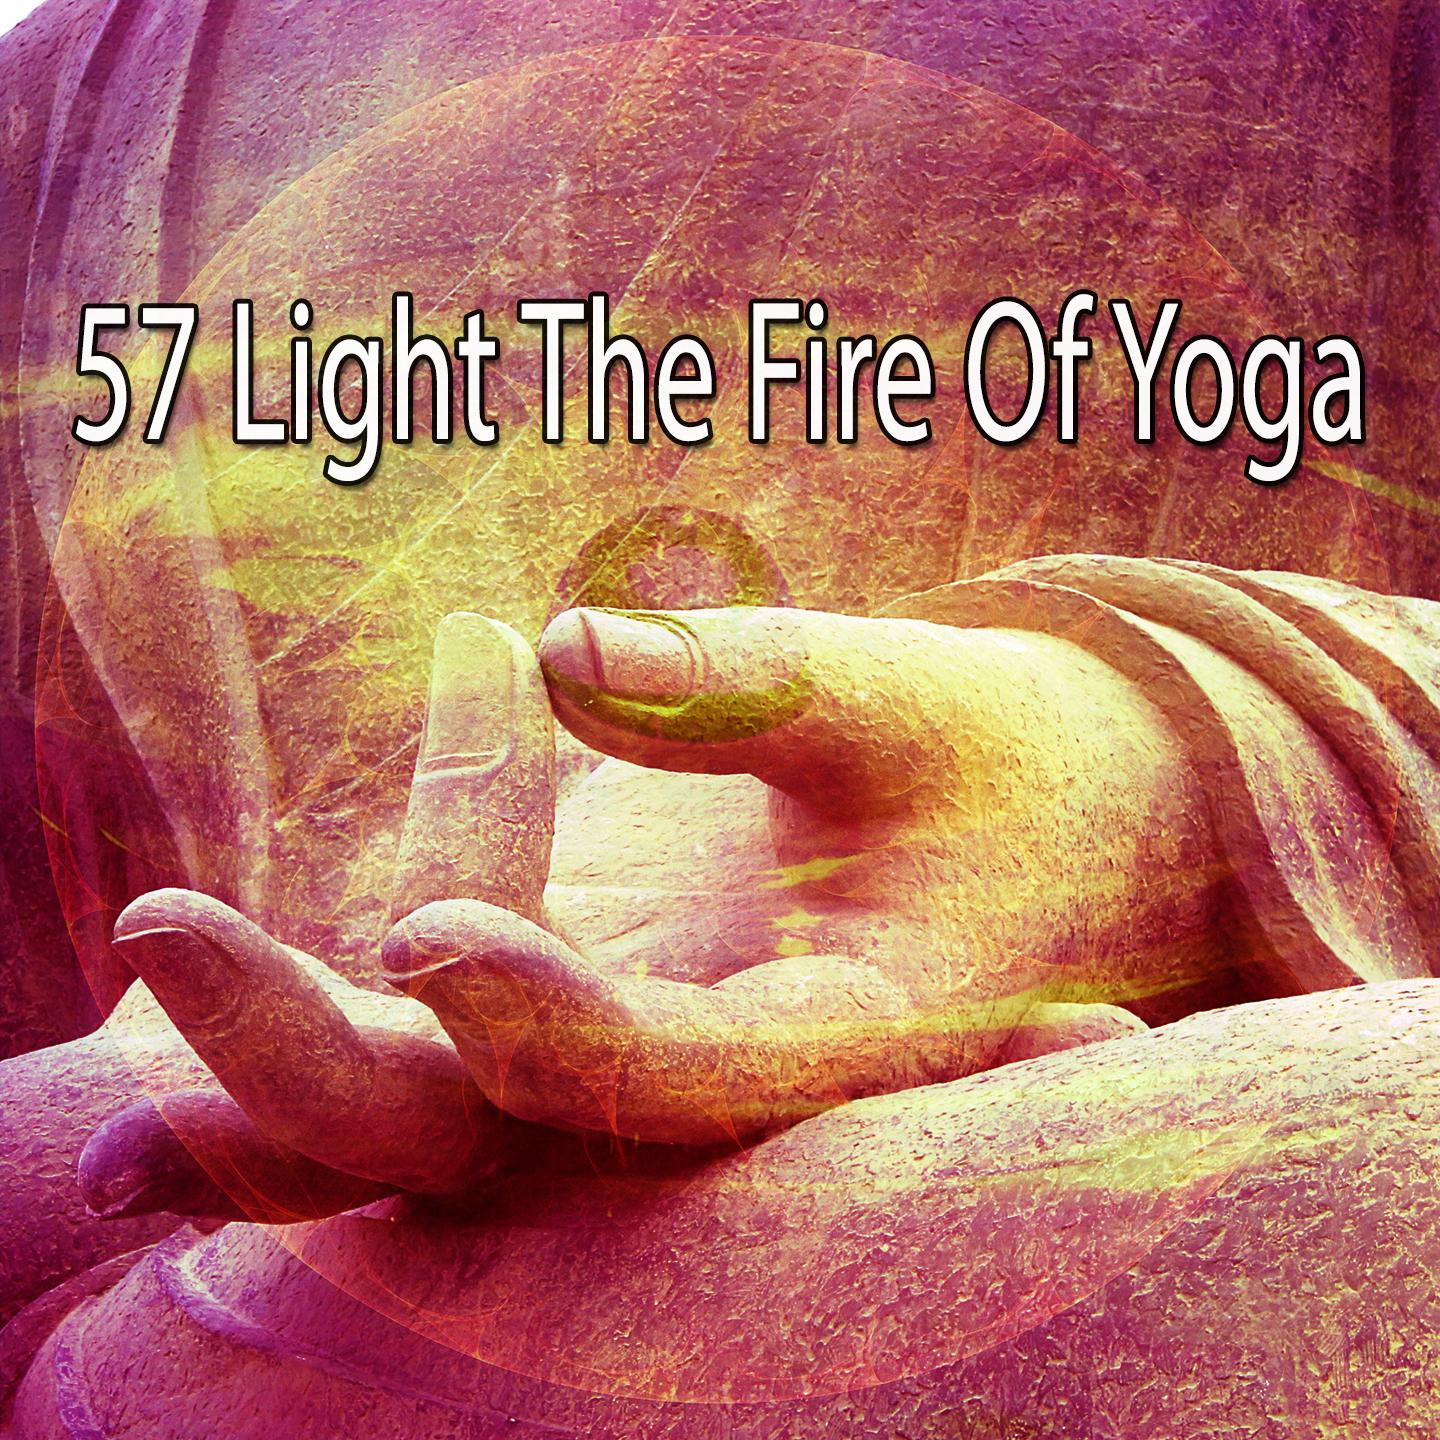 57 Light the Fire of Yoga